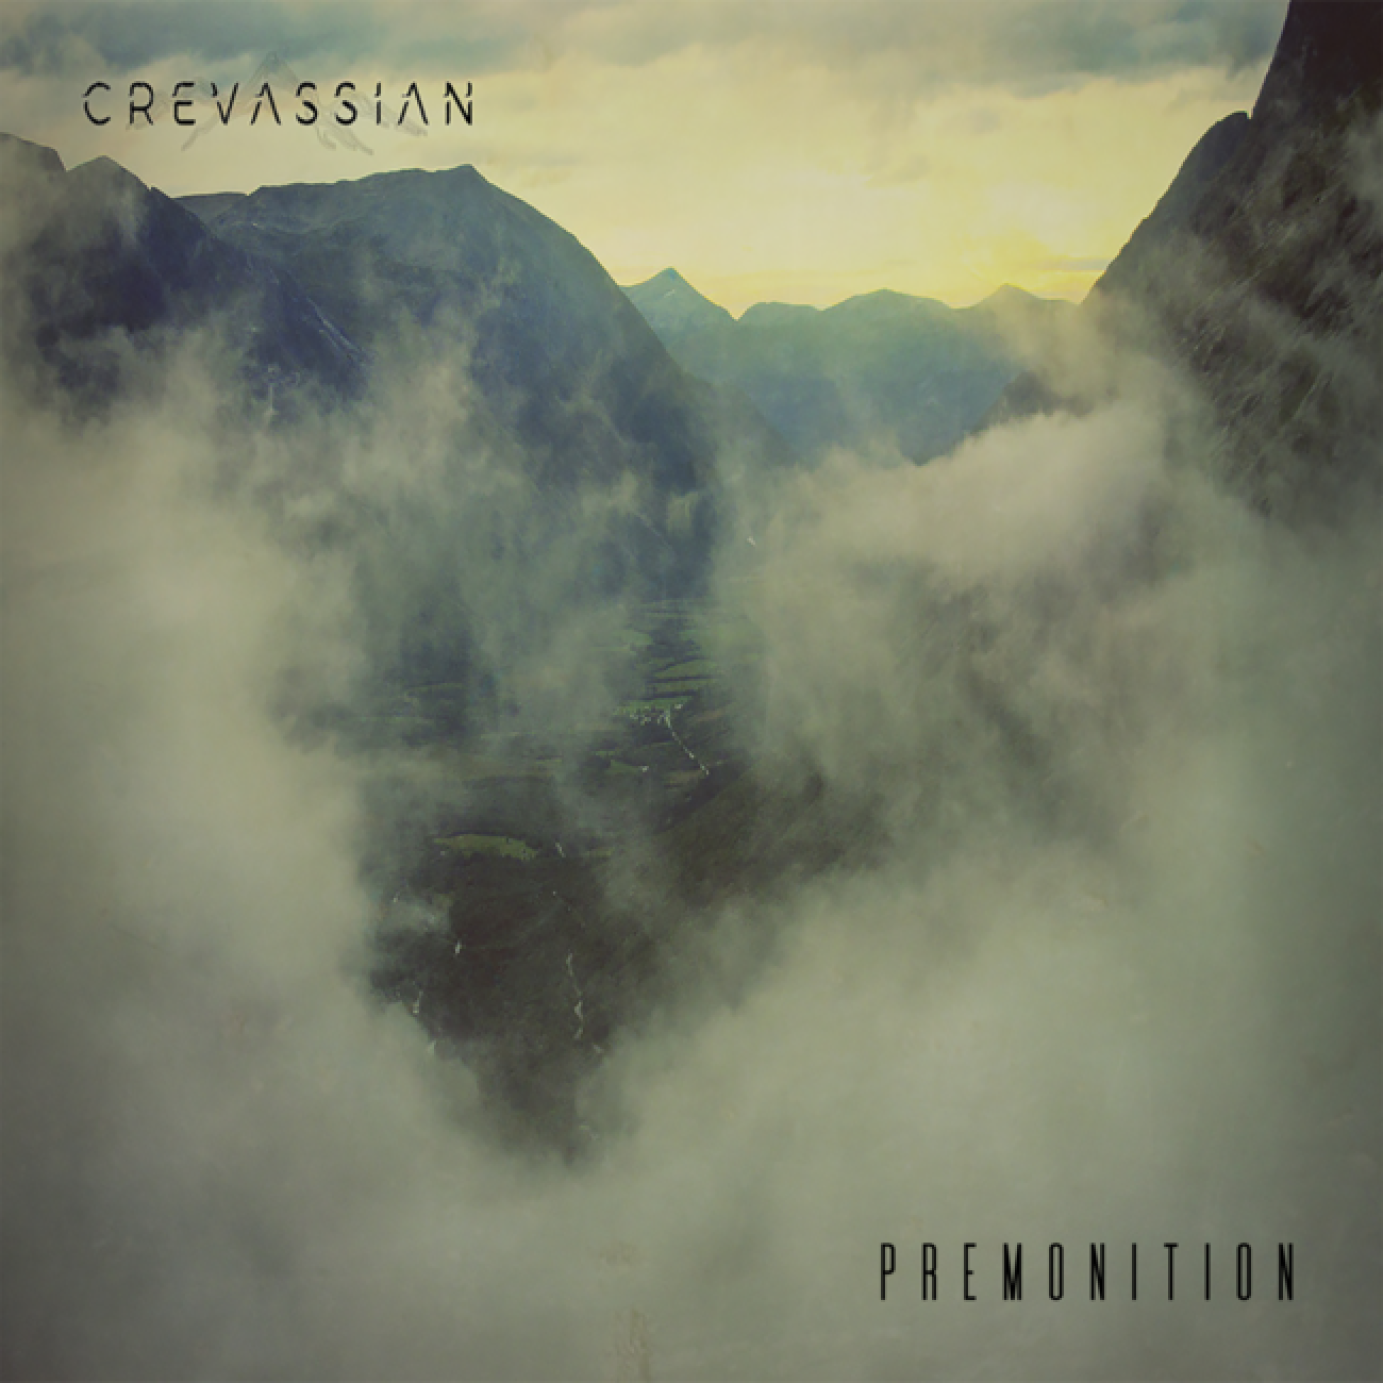 Artwork for Crevassian by nickpoveycollage